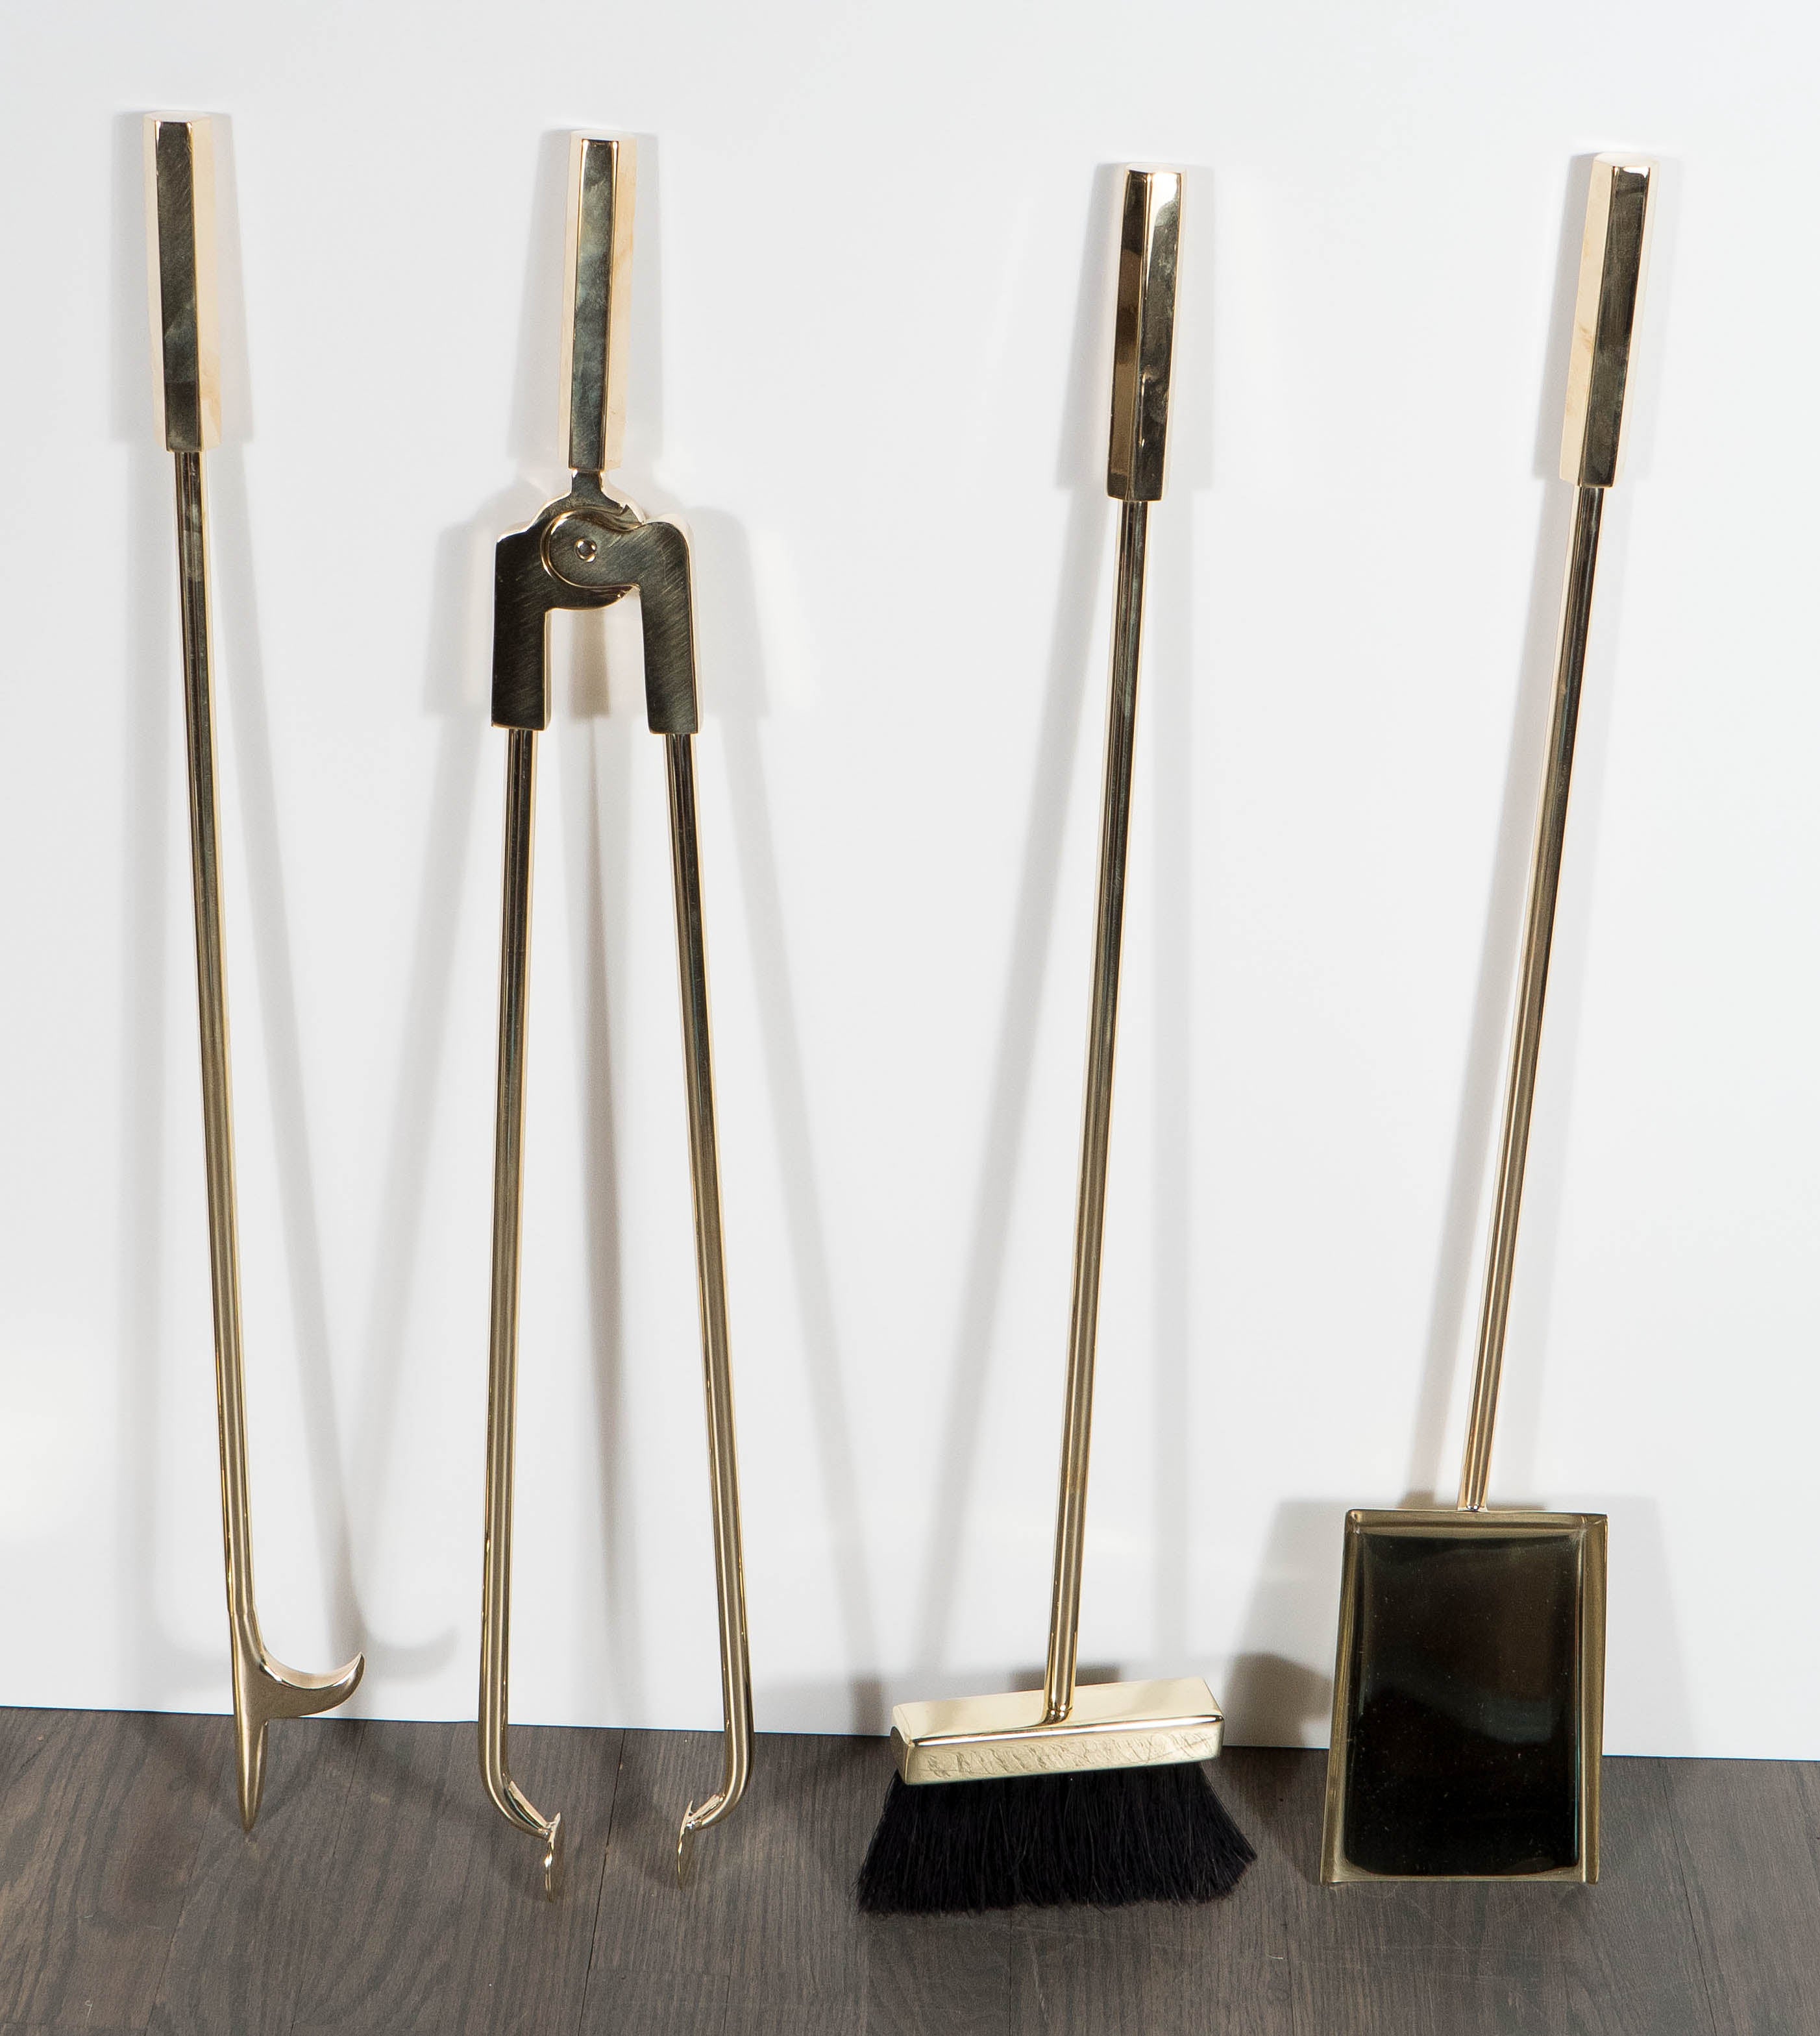 Custom Modernist Four-Piece Fire Tool Set in Polished Brass In Excellent Condition For Sale In New York, NY